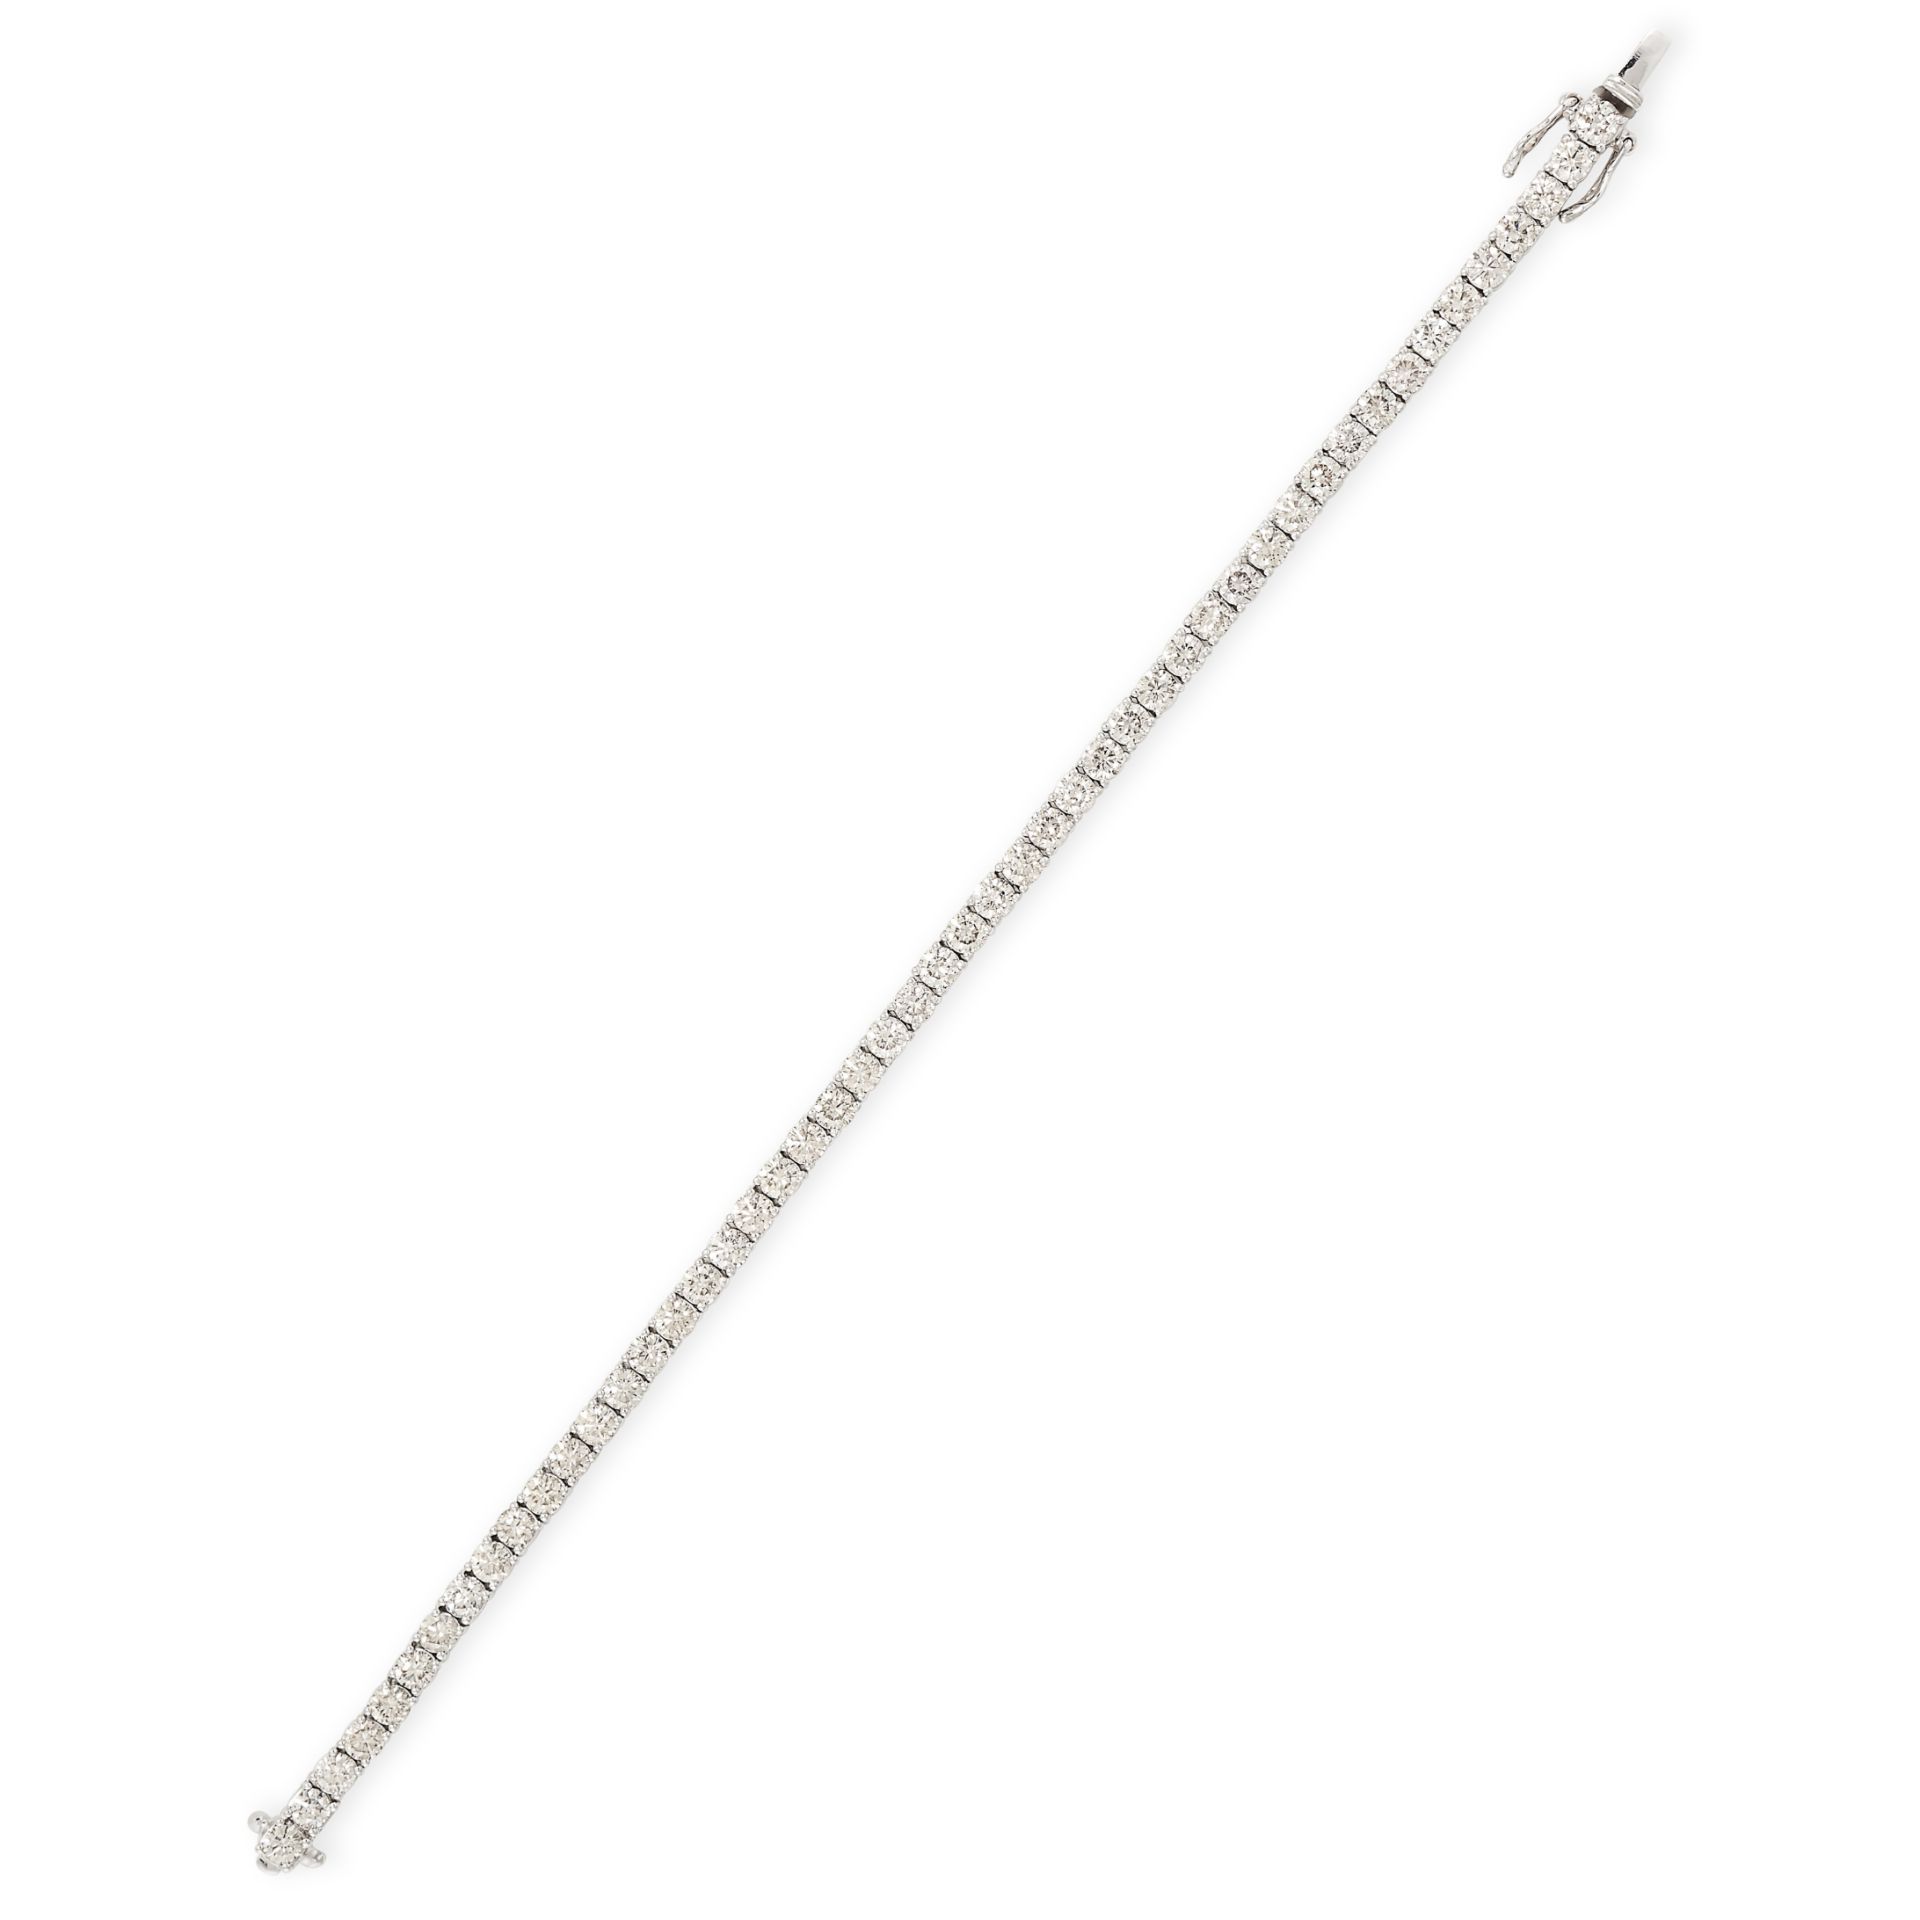 A DIAMOND LINE BRACELET in platinum, set with a single row of fifty round brilliant cut diamonds all